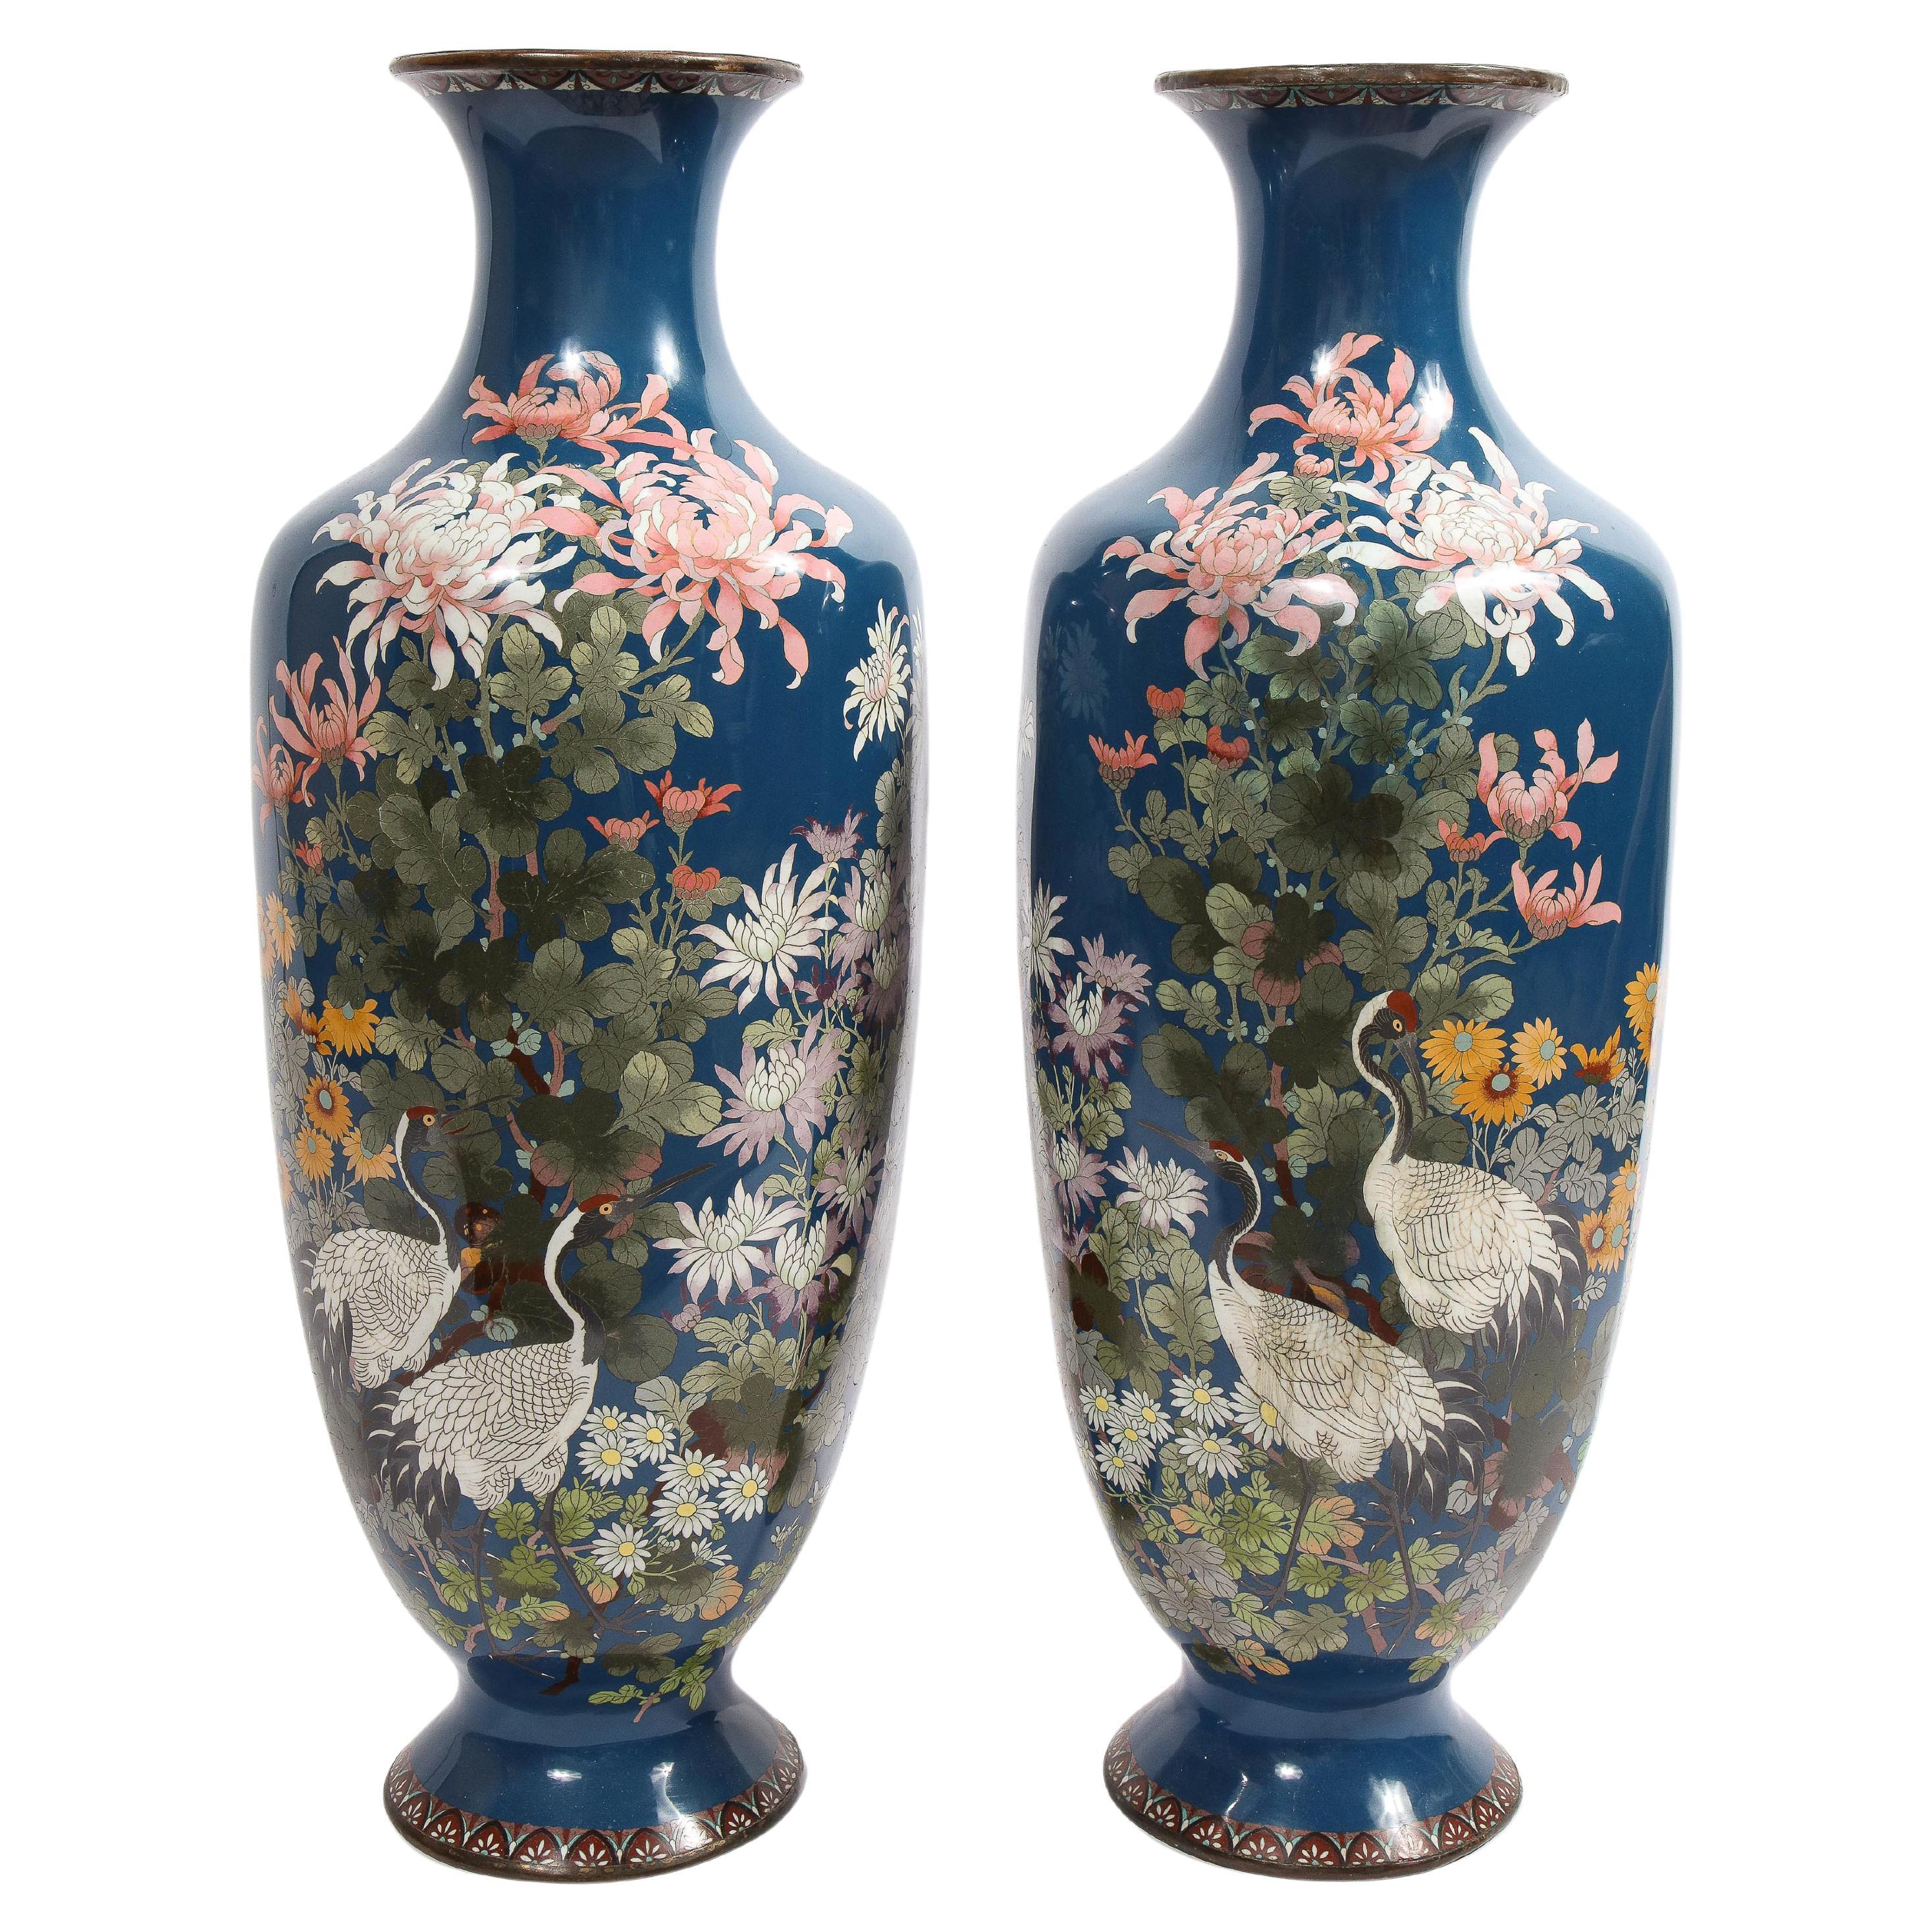 A large pair of Japanese Meiji Period Blue-Ground Cloisonne enamel vases, 19th century.

Very nice quality, with cloisonne enamel throughout, depicting cranes, flowers and blossoms with a nice blue background.

Measures: 38